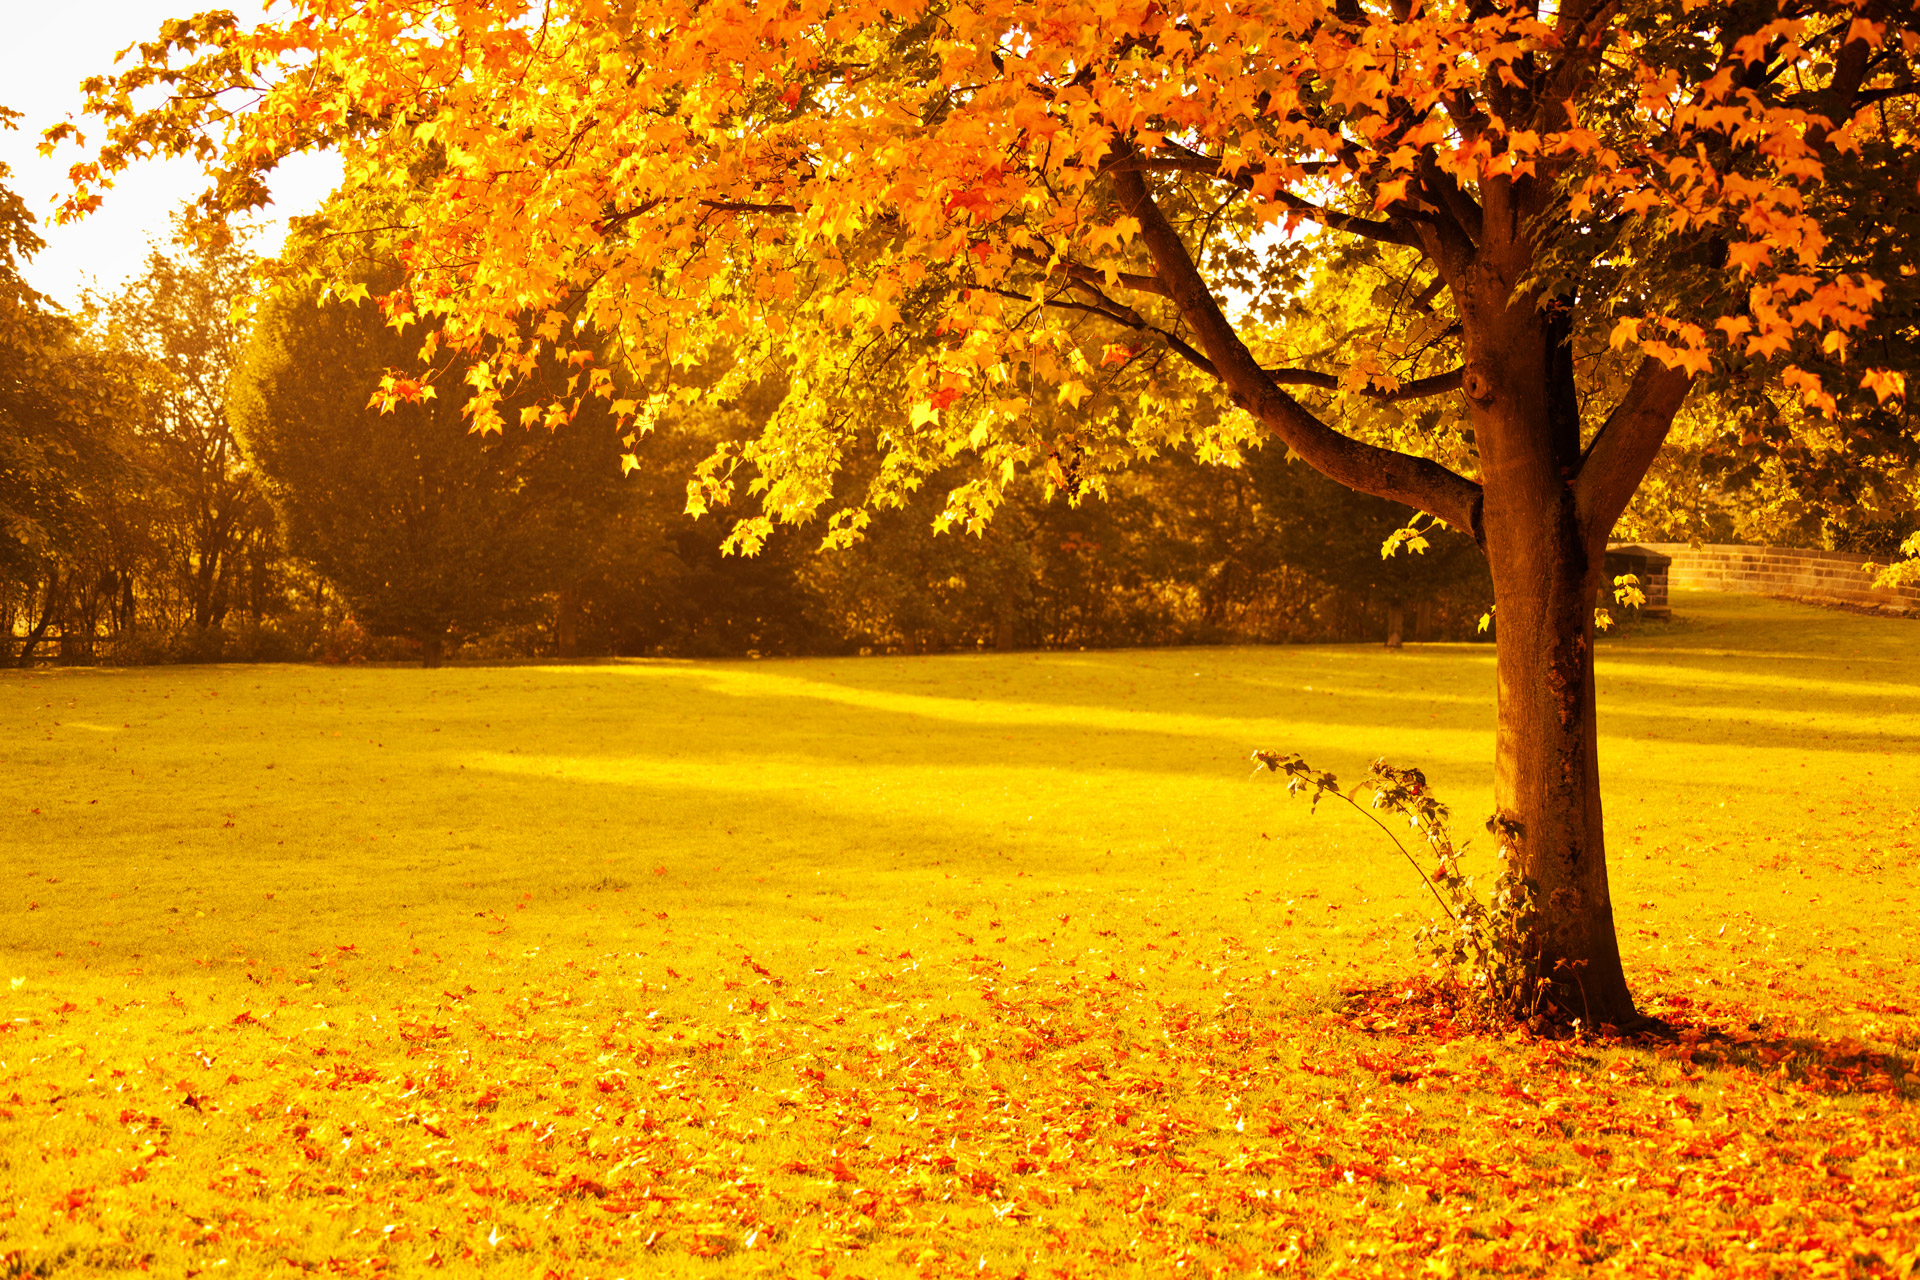 fall foliage and yellow leaves on ground